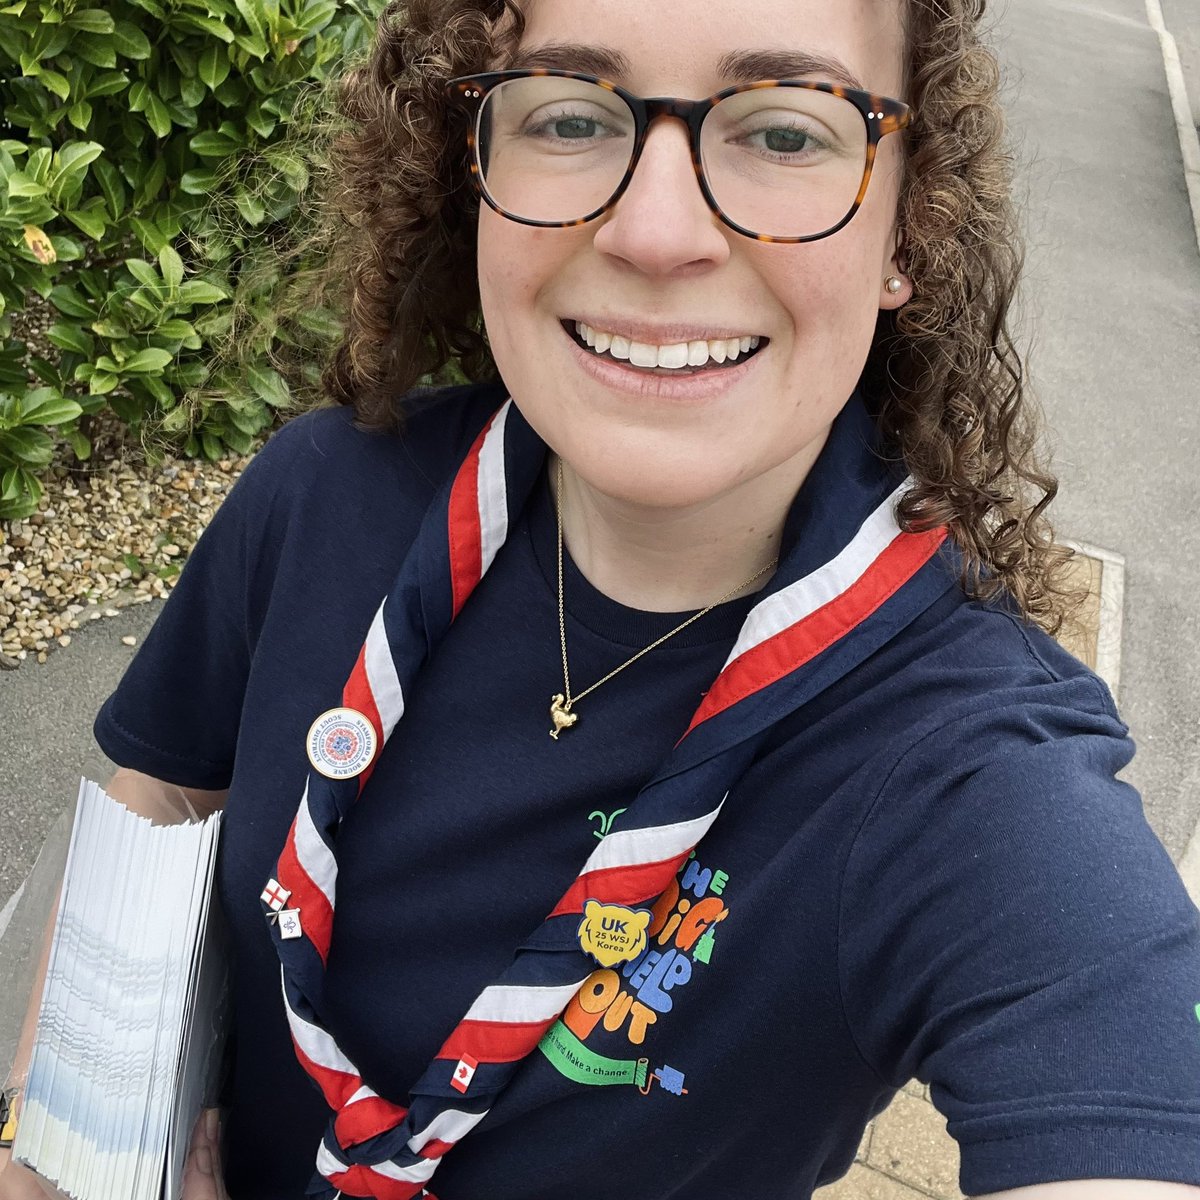 Back from #Coronation duties and out in my District to share the power of volunteering in our communities. Encouraging people to lend a helping hand and get involved in Scouting 😃#TheBigHelpOut @stambournescout @LincsScout @TheBigHelpOut23